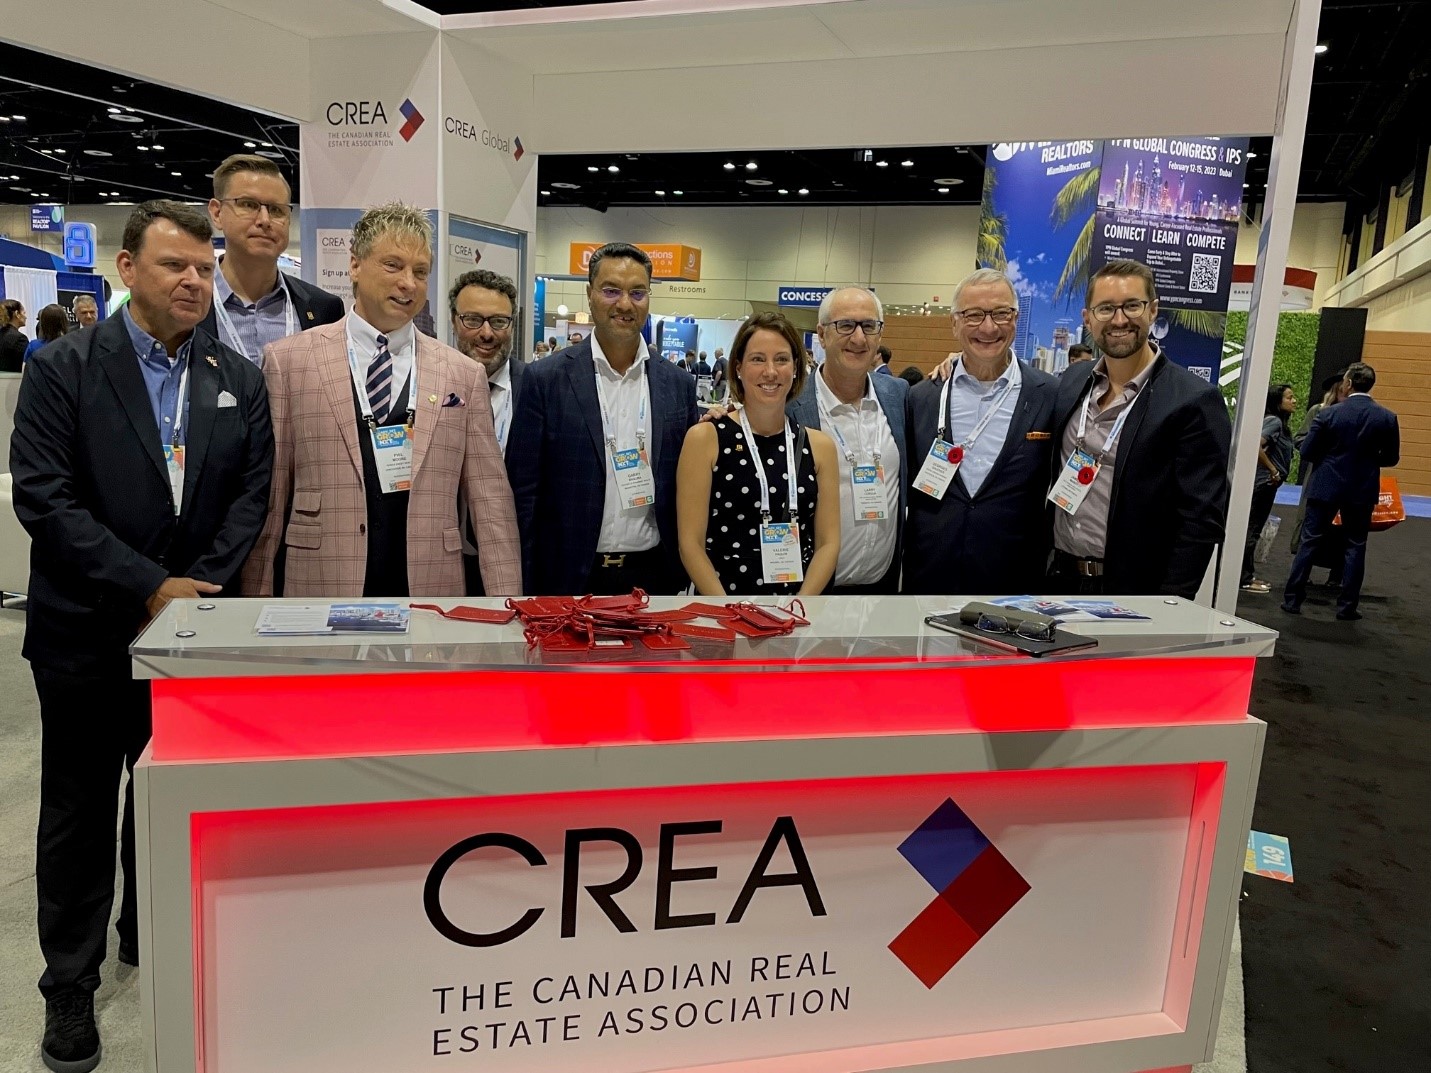 CREA’s CEO Michael Bourque, Patrick Pichette, Vice President of REALTOR.ca and members of CREA’s Board of Directors help work the booth during NAR’s annual conference.